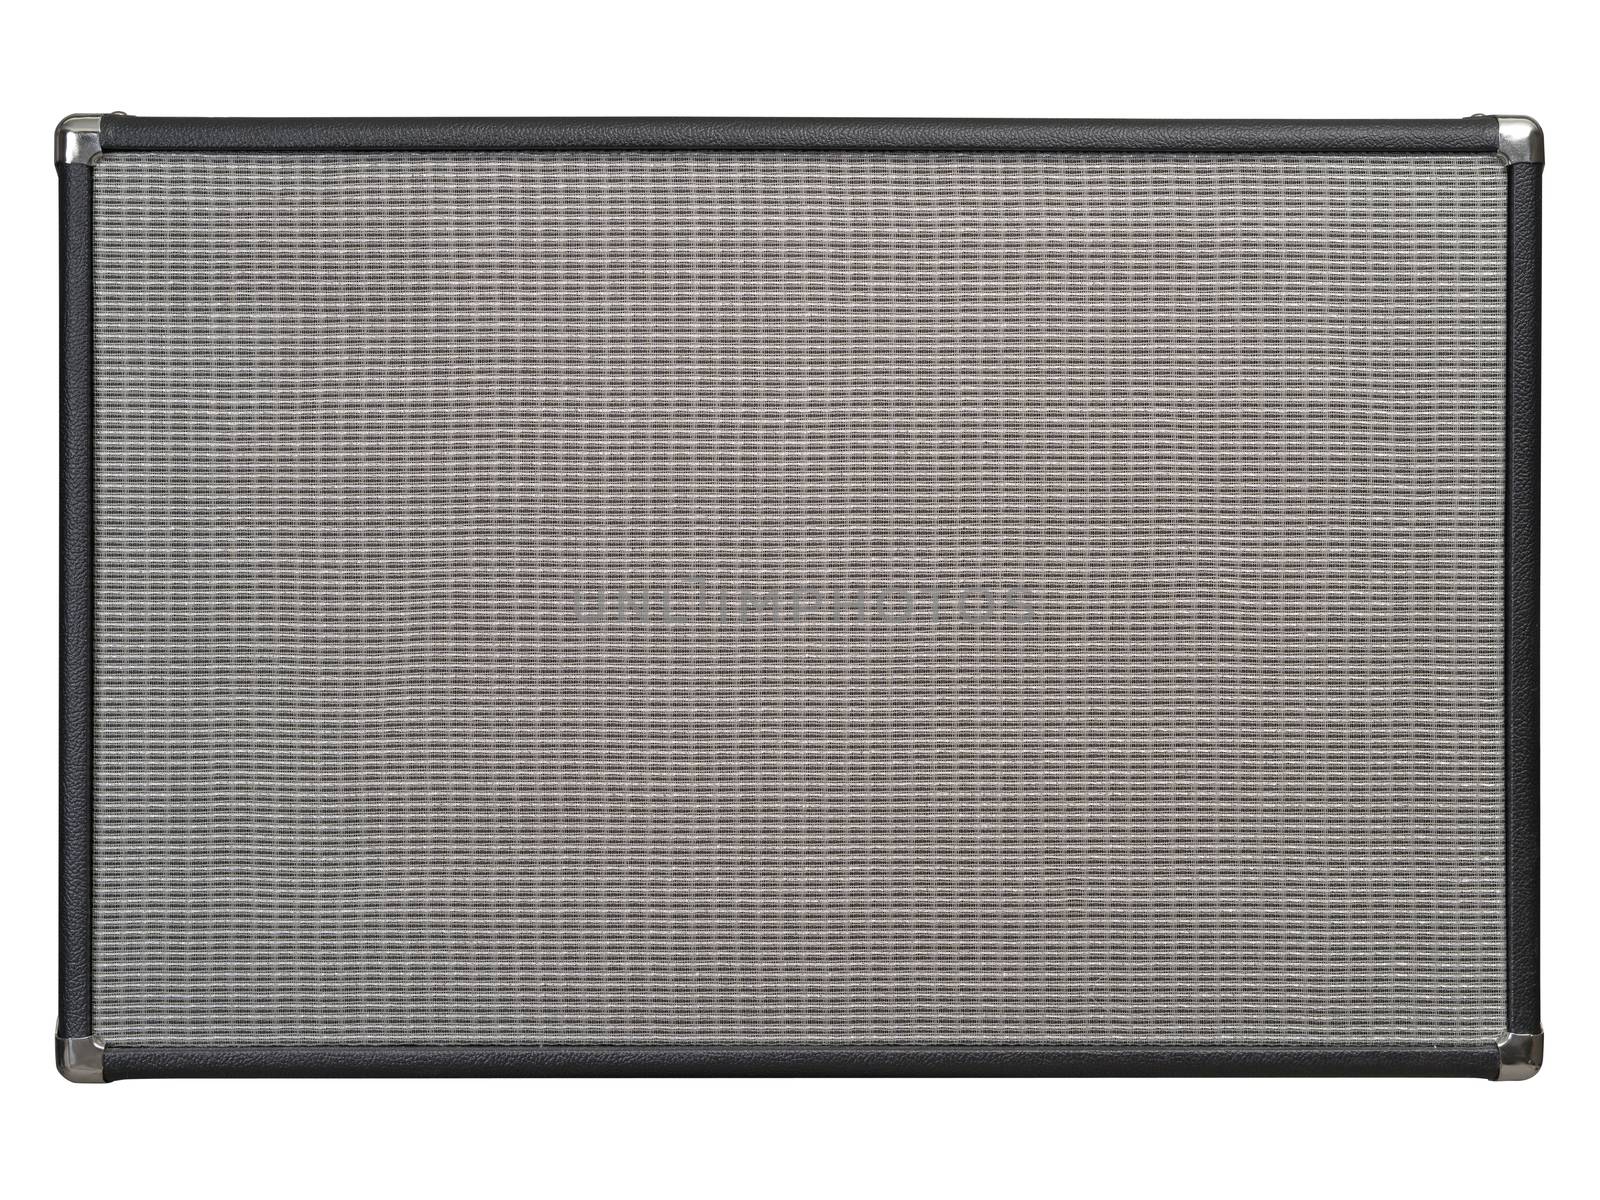 Photo of the front of a guitar amplifier as a background. Clipping path included.
